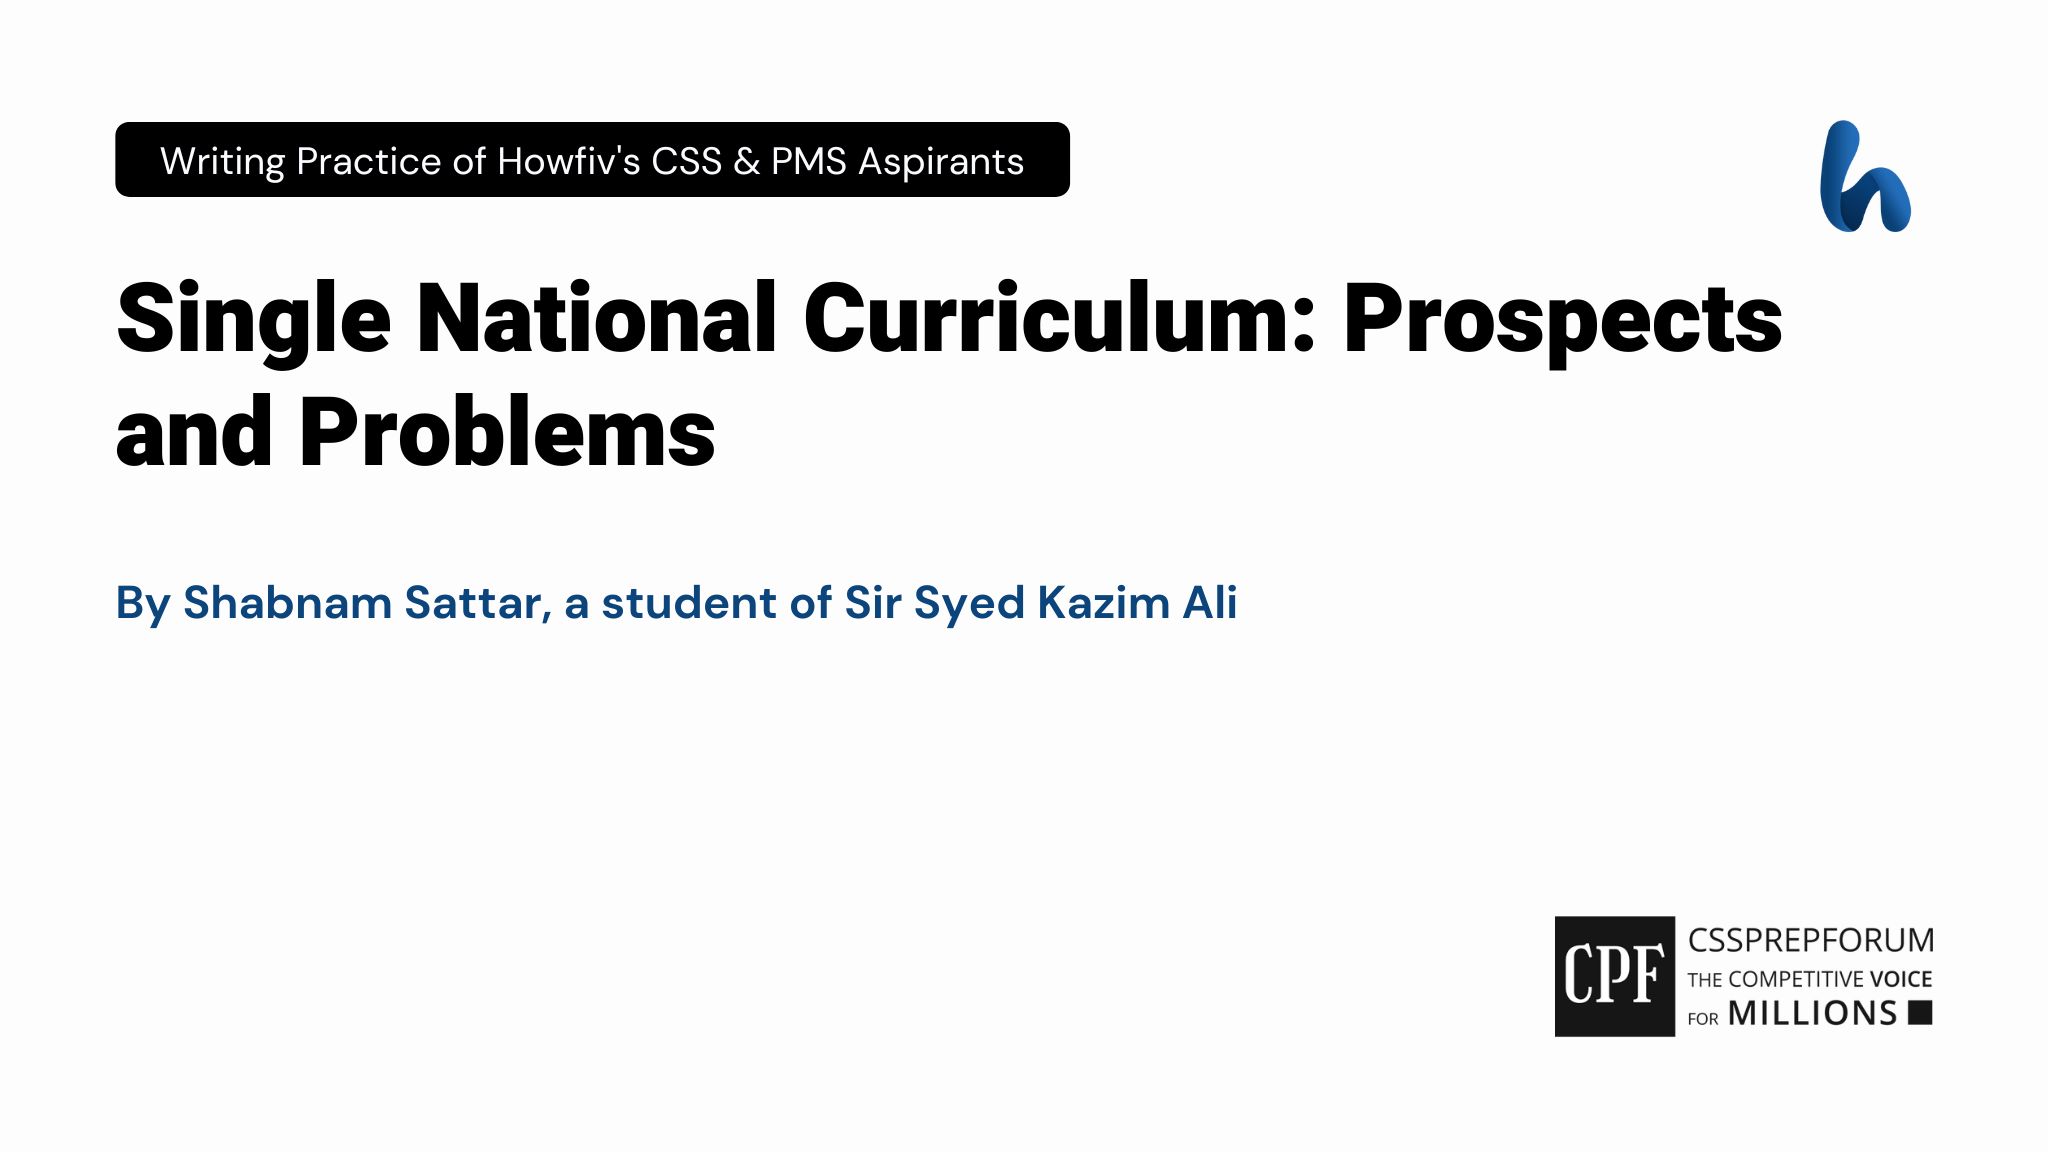 Single National Curriculum: Prospects and Problems